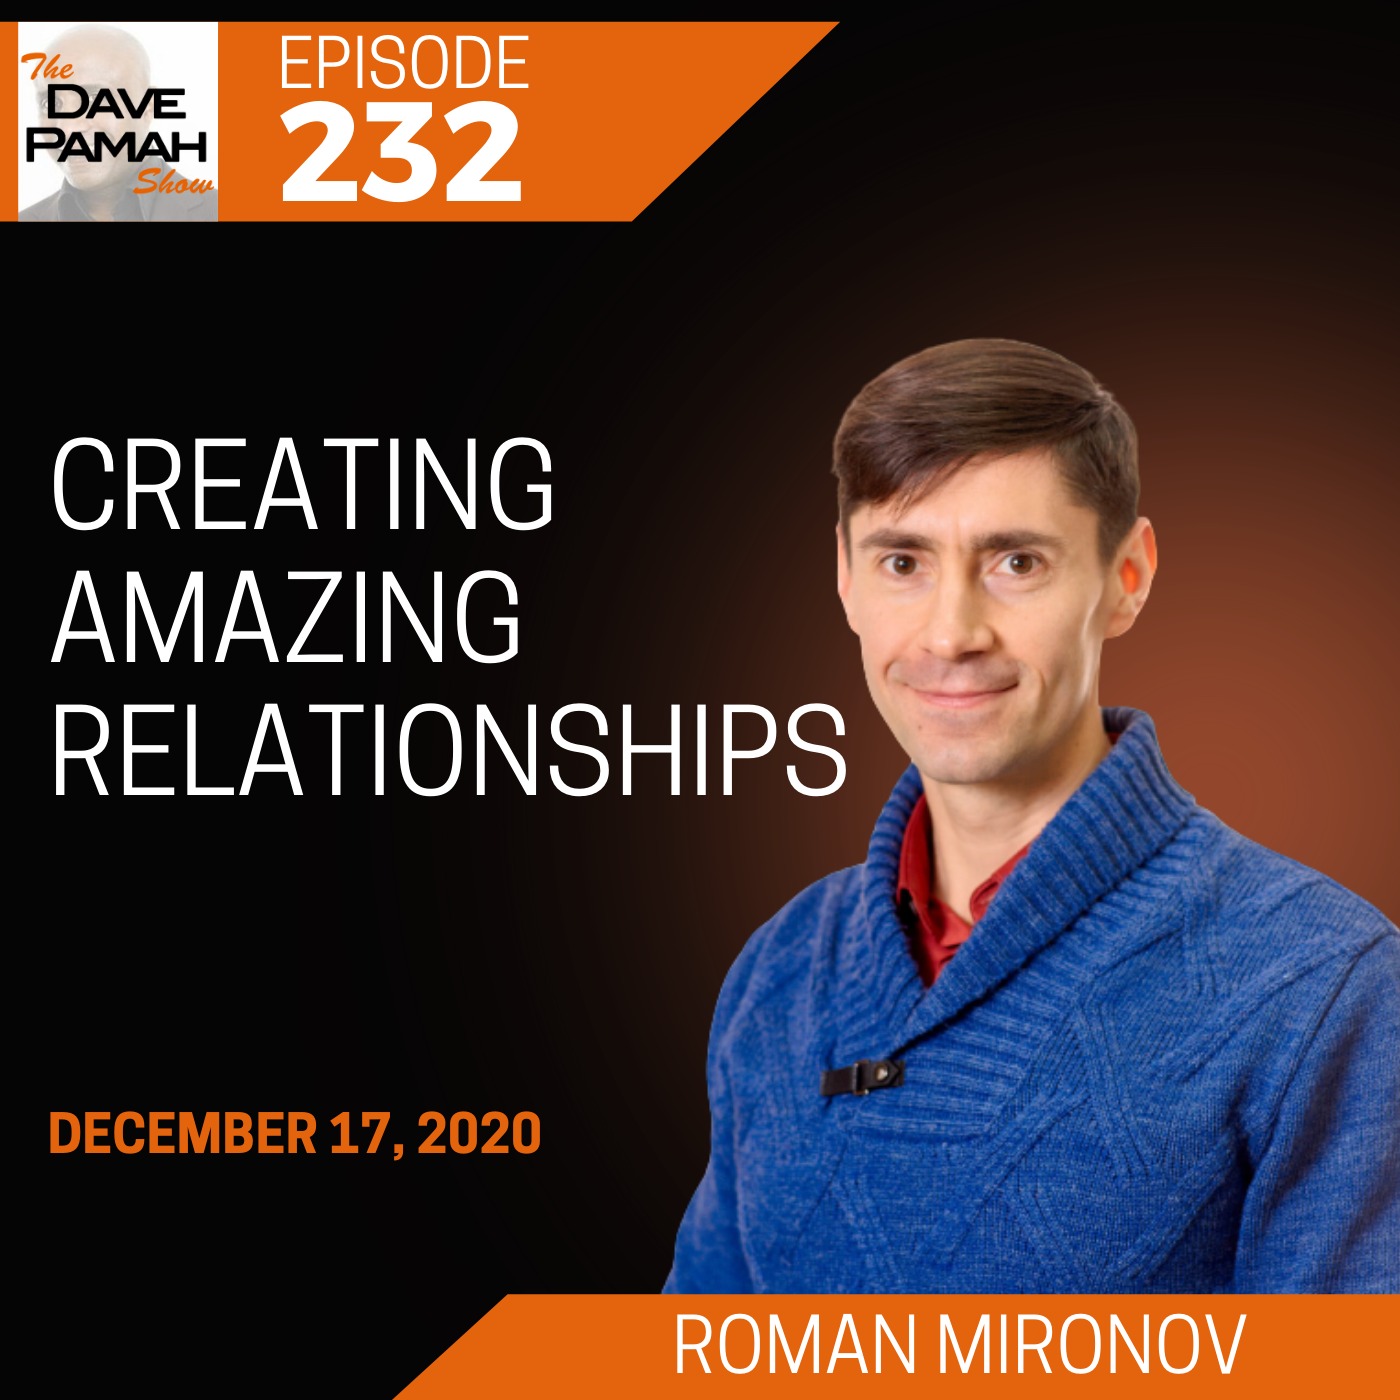 Creating amazing relationships with Roman Mironov